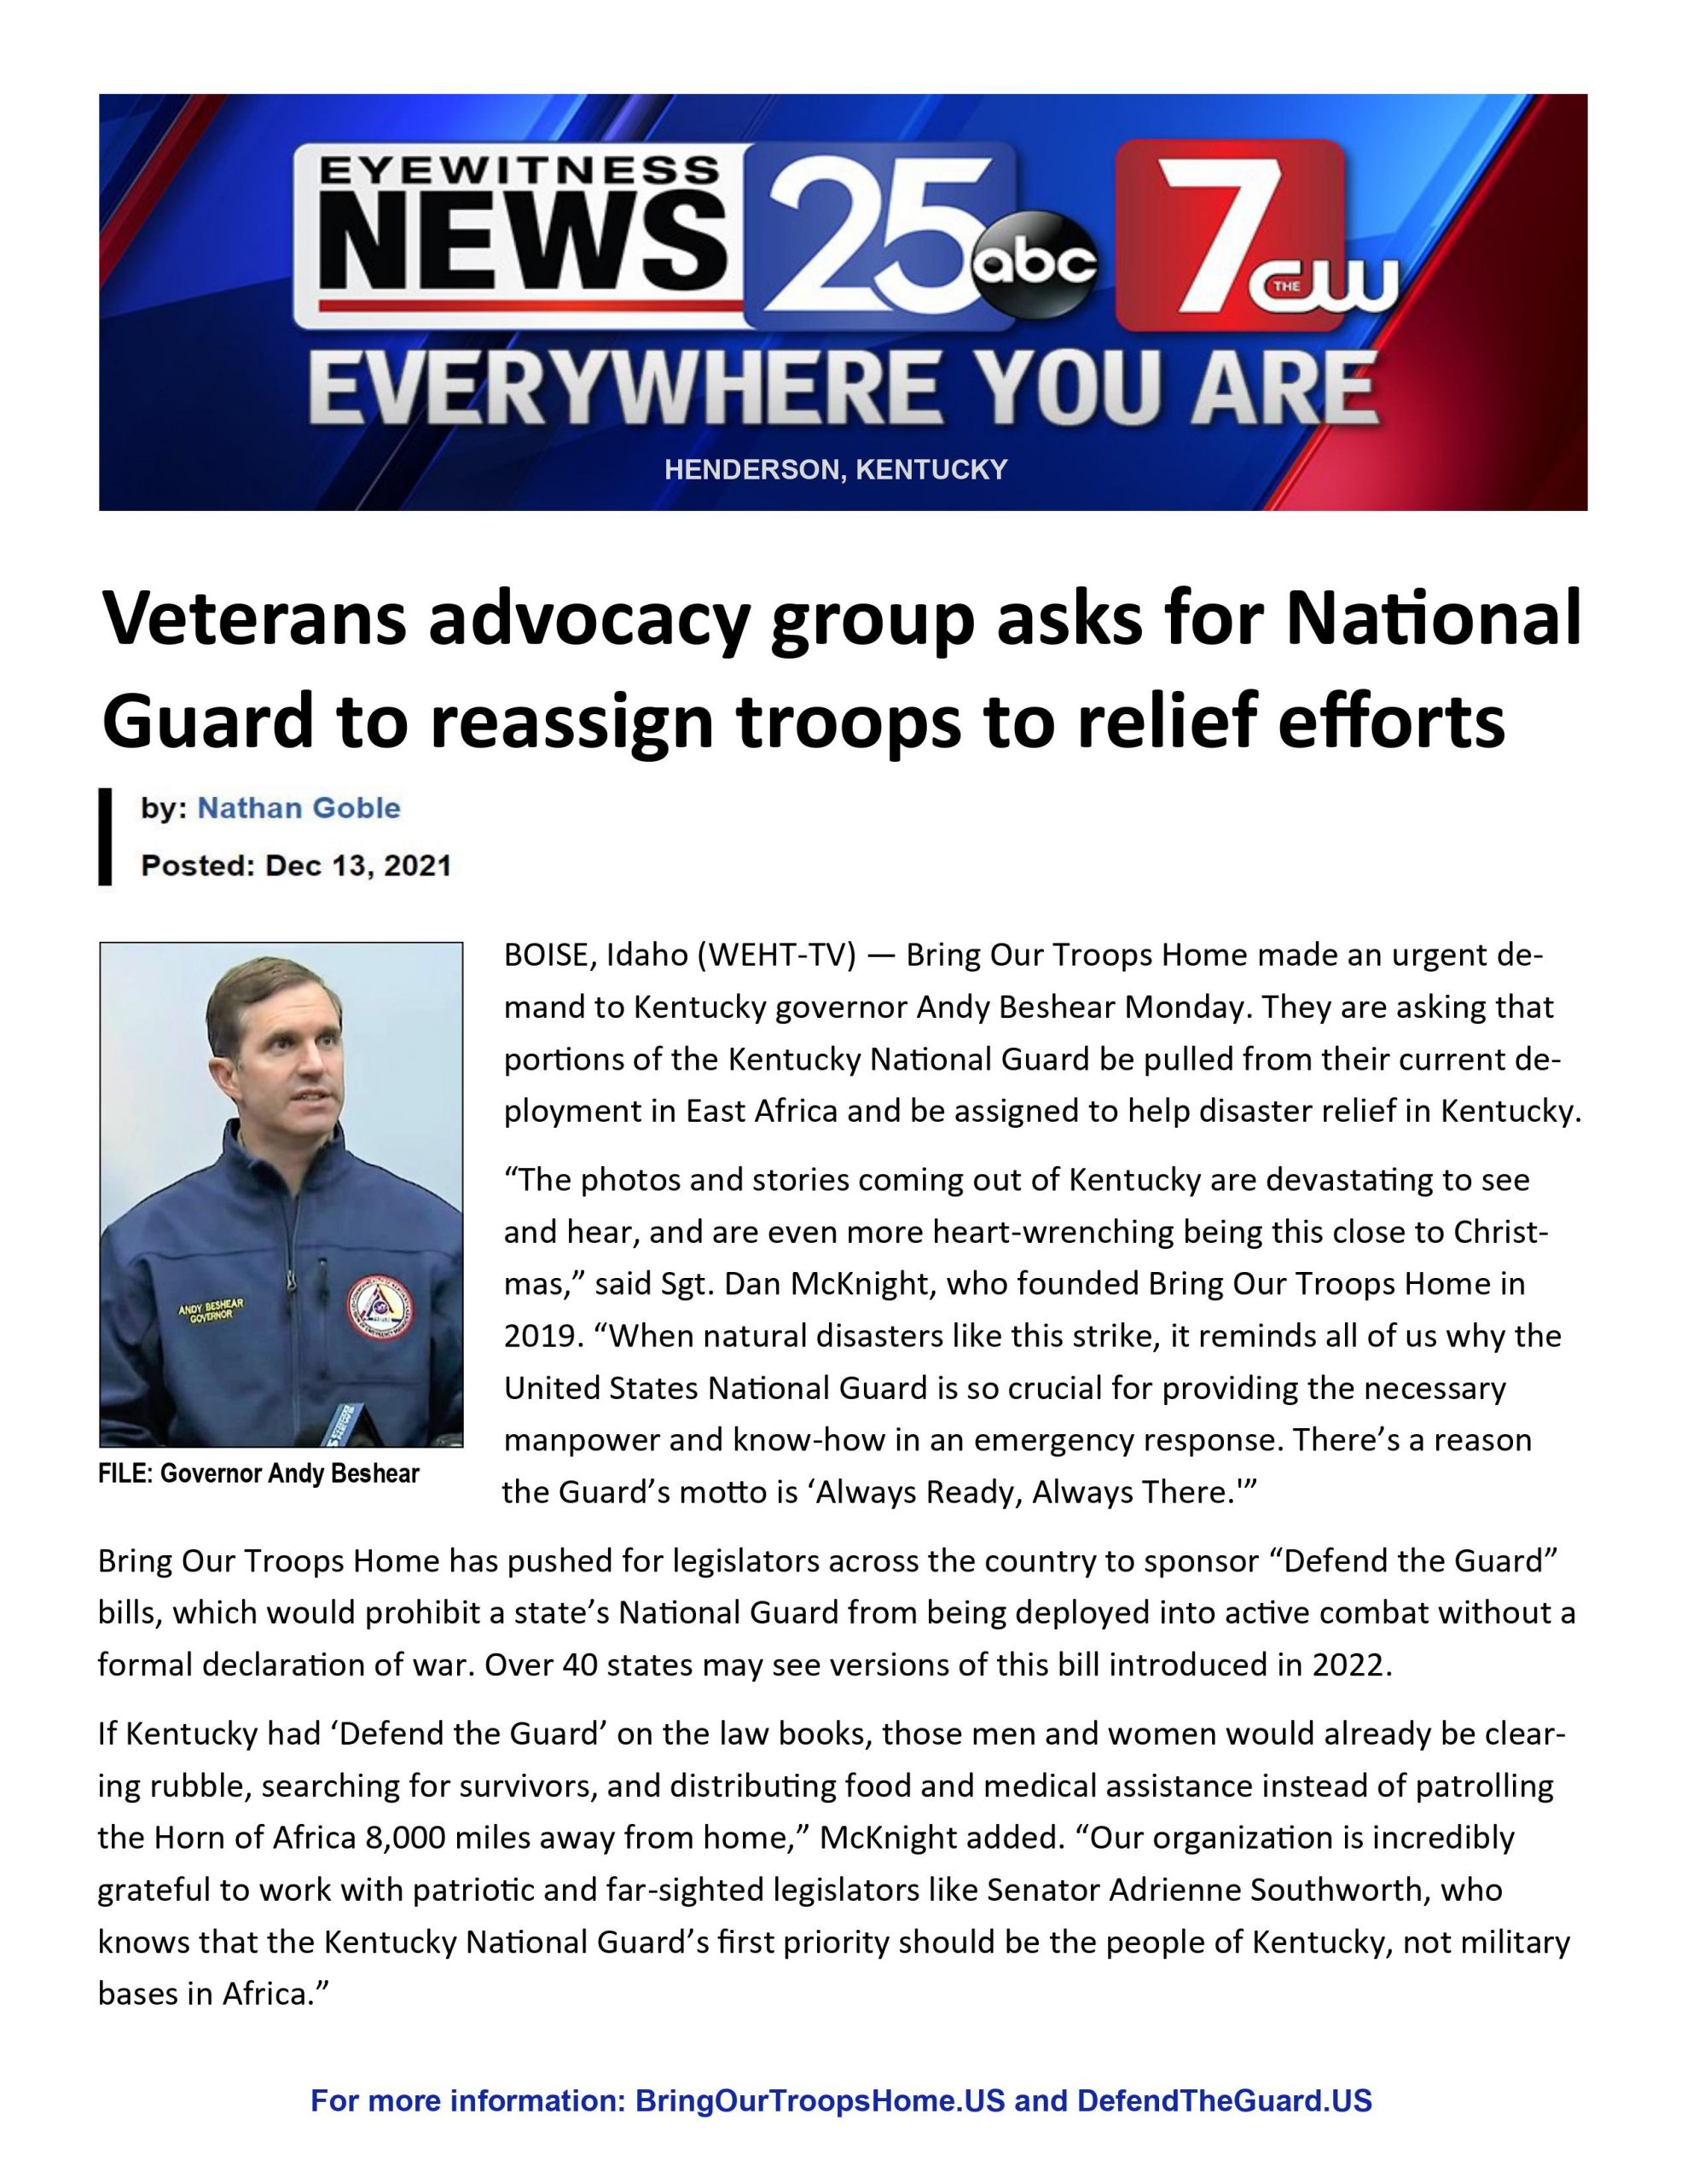 Veterans Advocacy Group Asks For National Guard to Reassign Troops to Relief Efforts